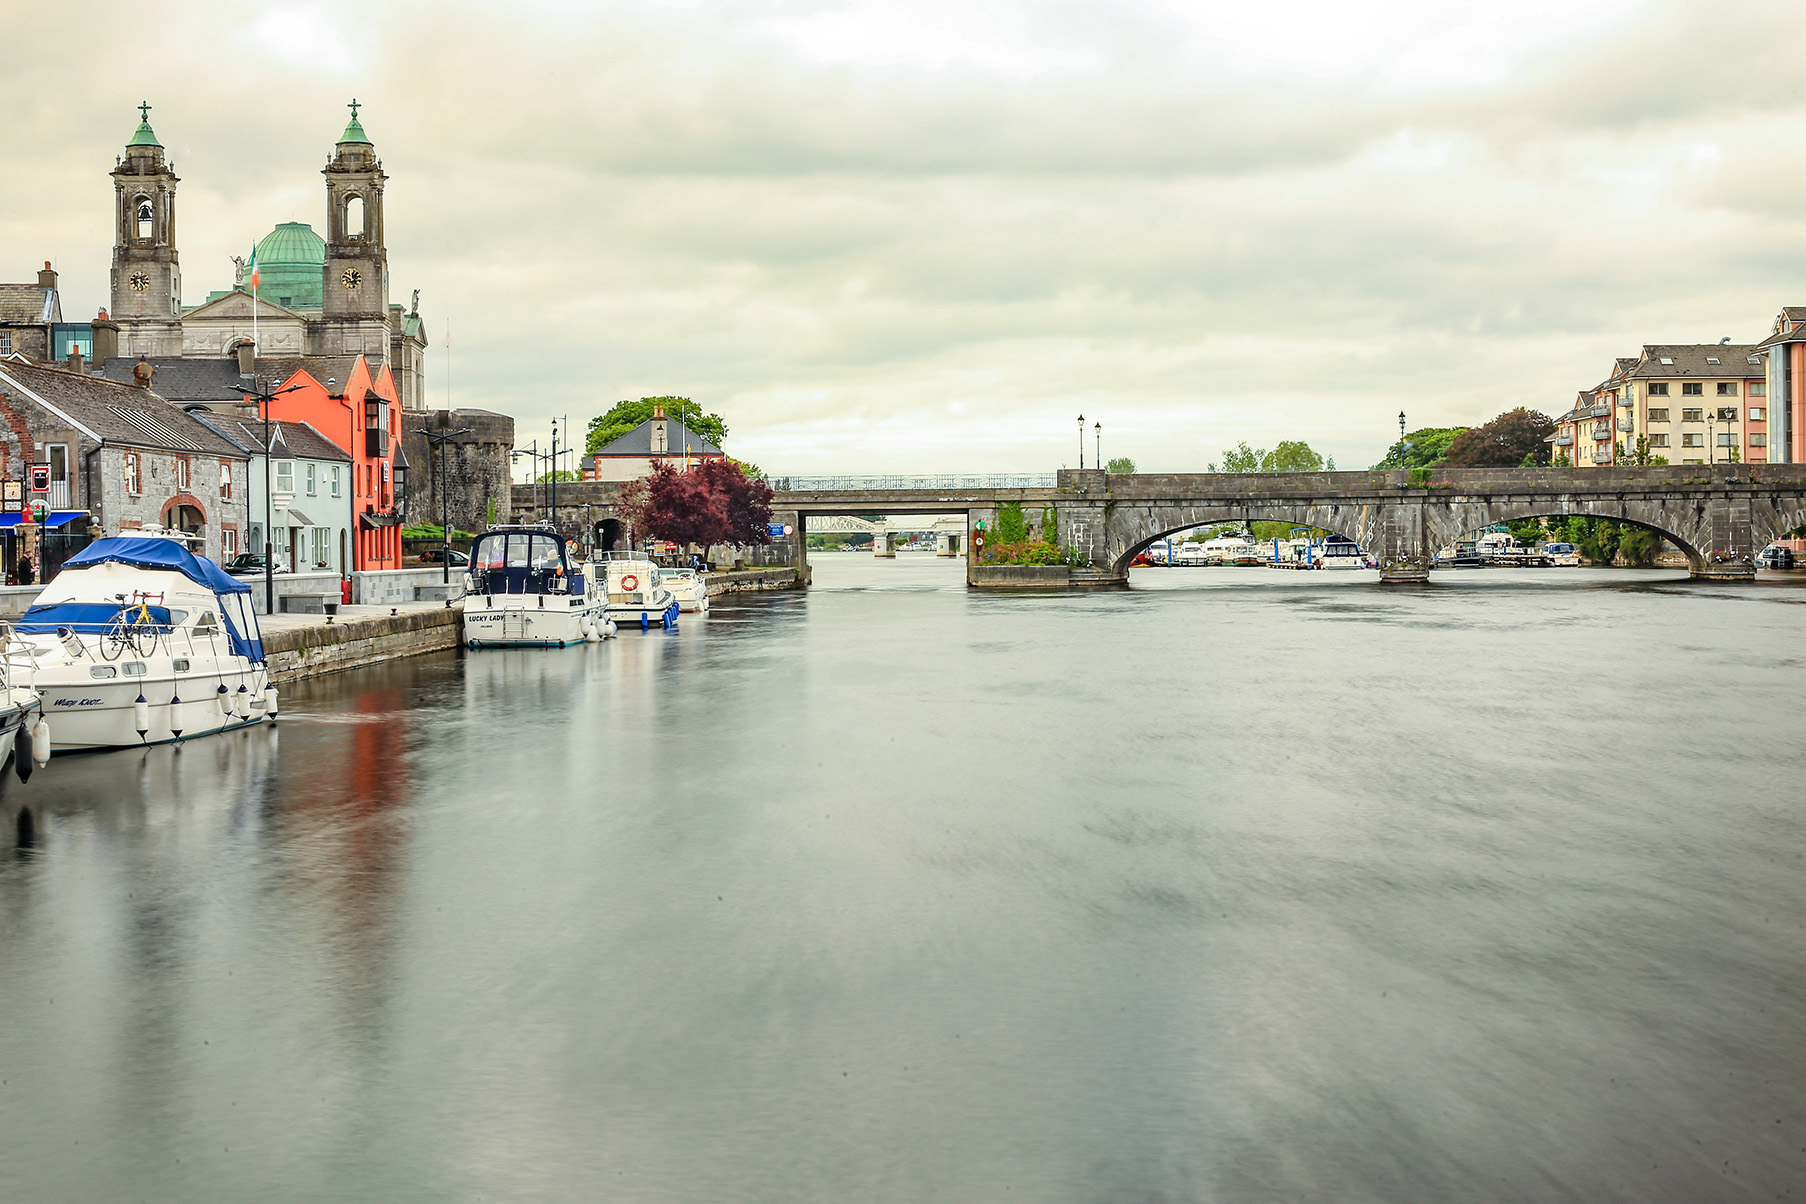 River Shannon in Athlone